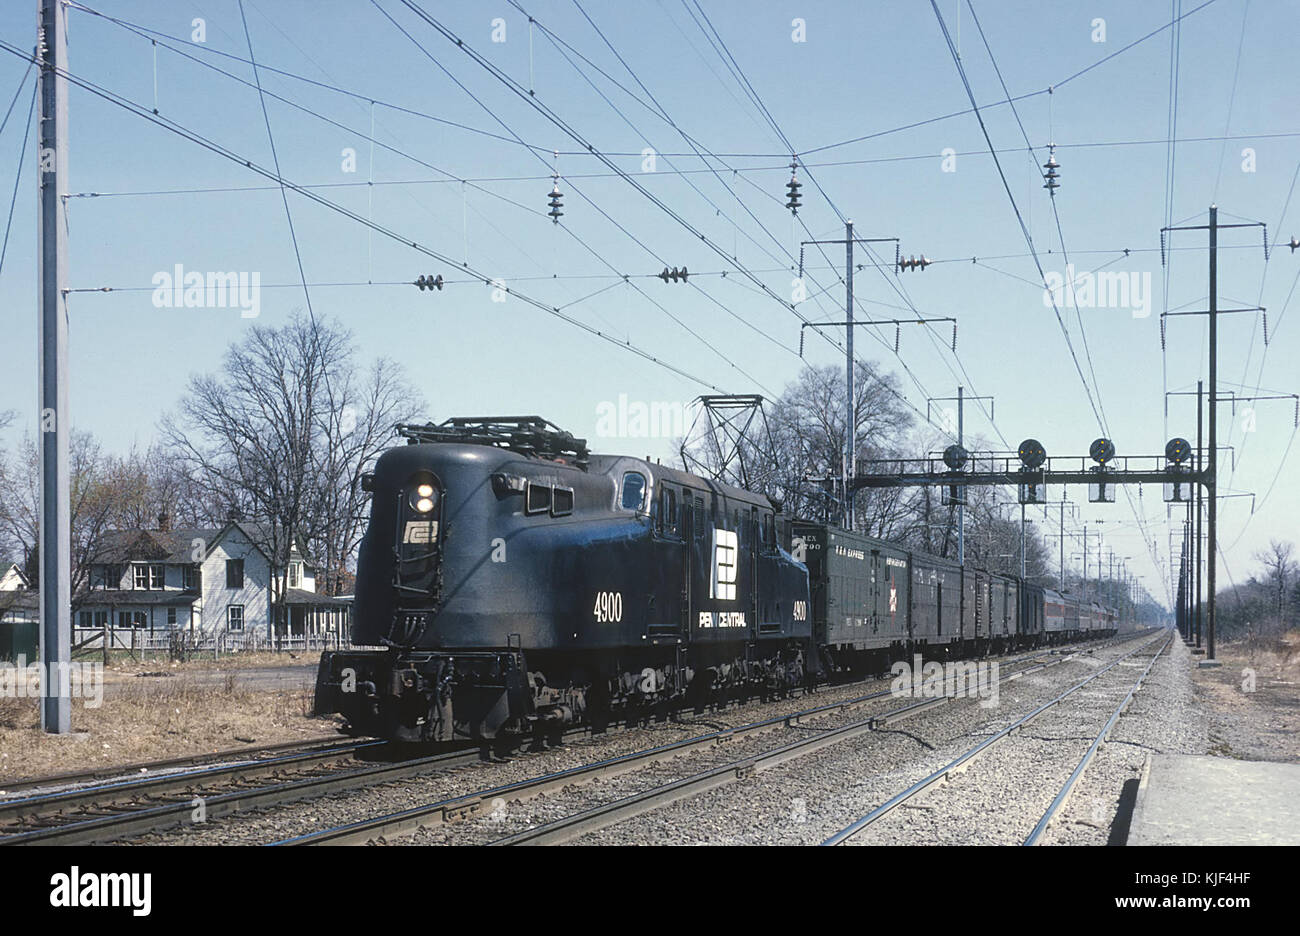 Penn Central GG1 4900 with Train 111, The President, at Seabrook, MD on March 23, 1969 (23680545644) Stock Photo